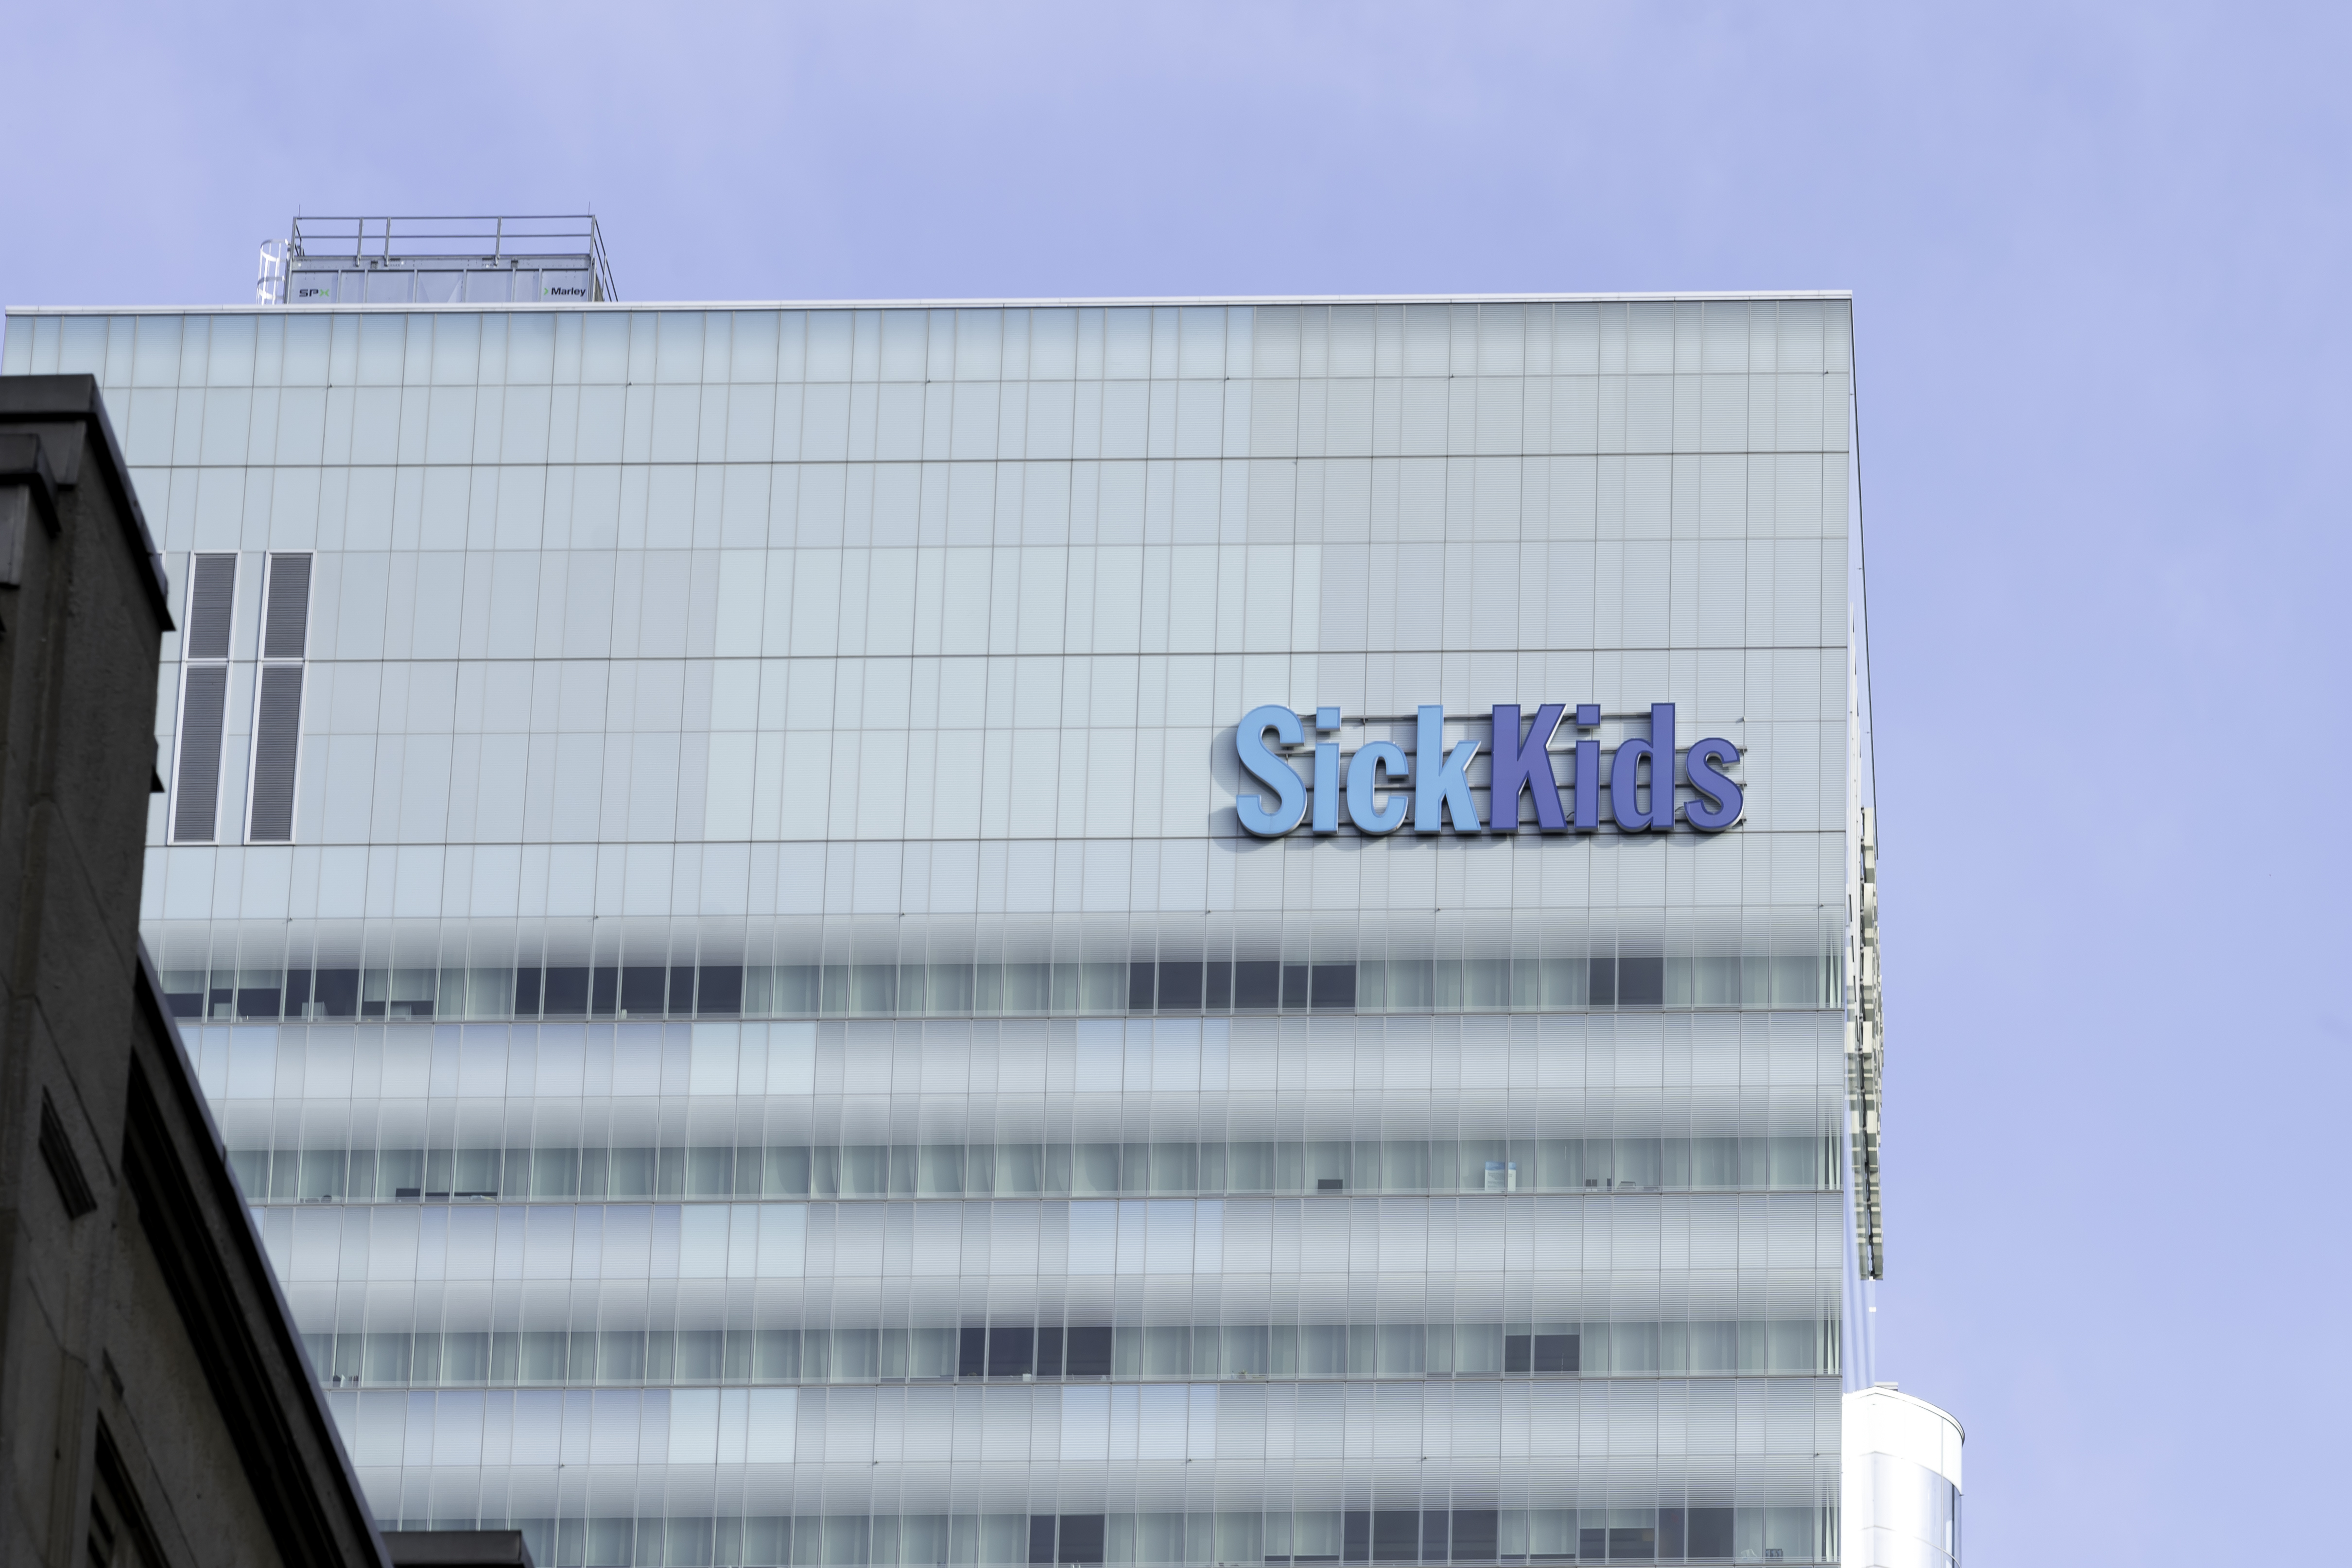 LockBit Ransomware Gang Apologizes For SickKids Hospital Attack, Offers Free Decryptor